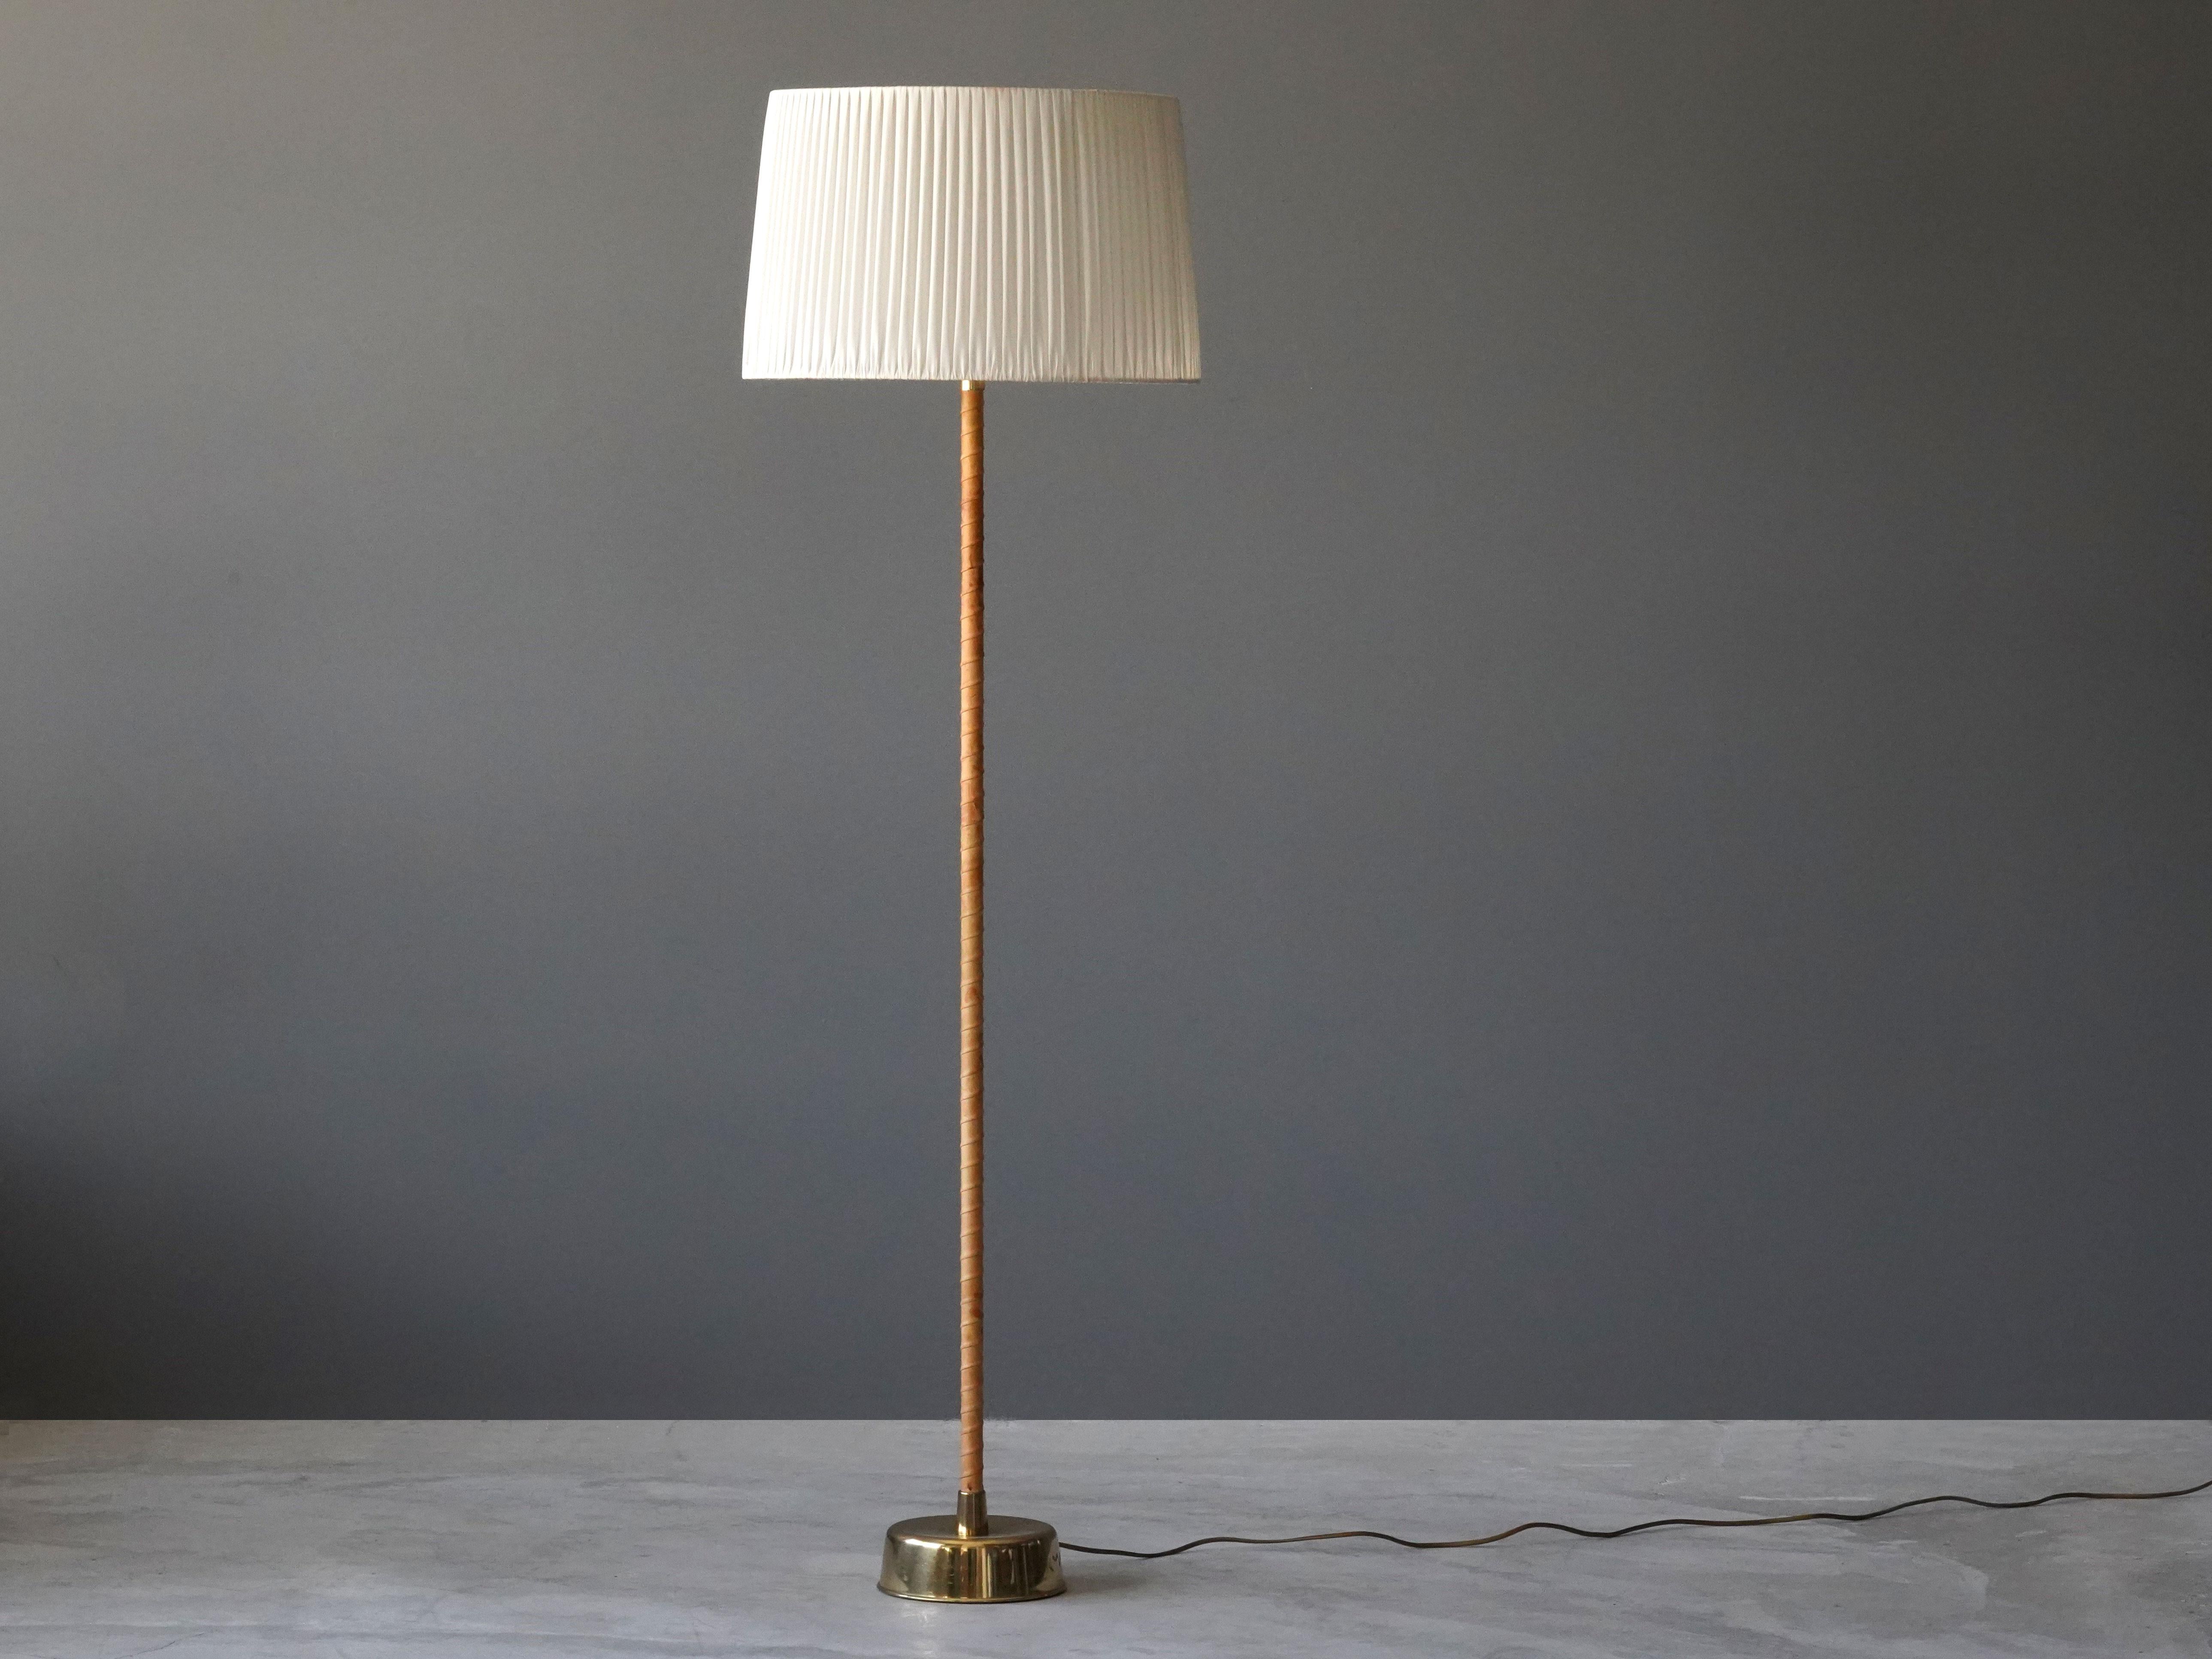 A floor lamp designed by Lisa Johansson-Pape in 1950. Variation on the 